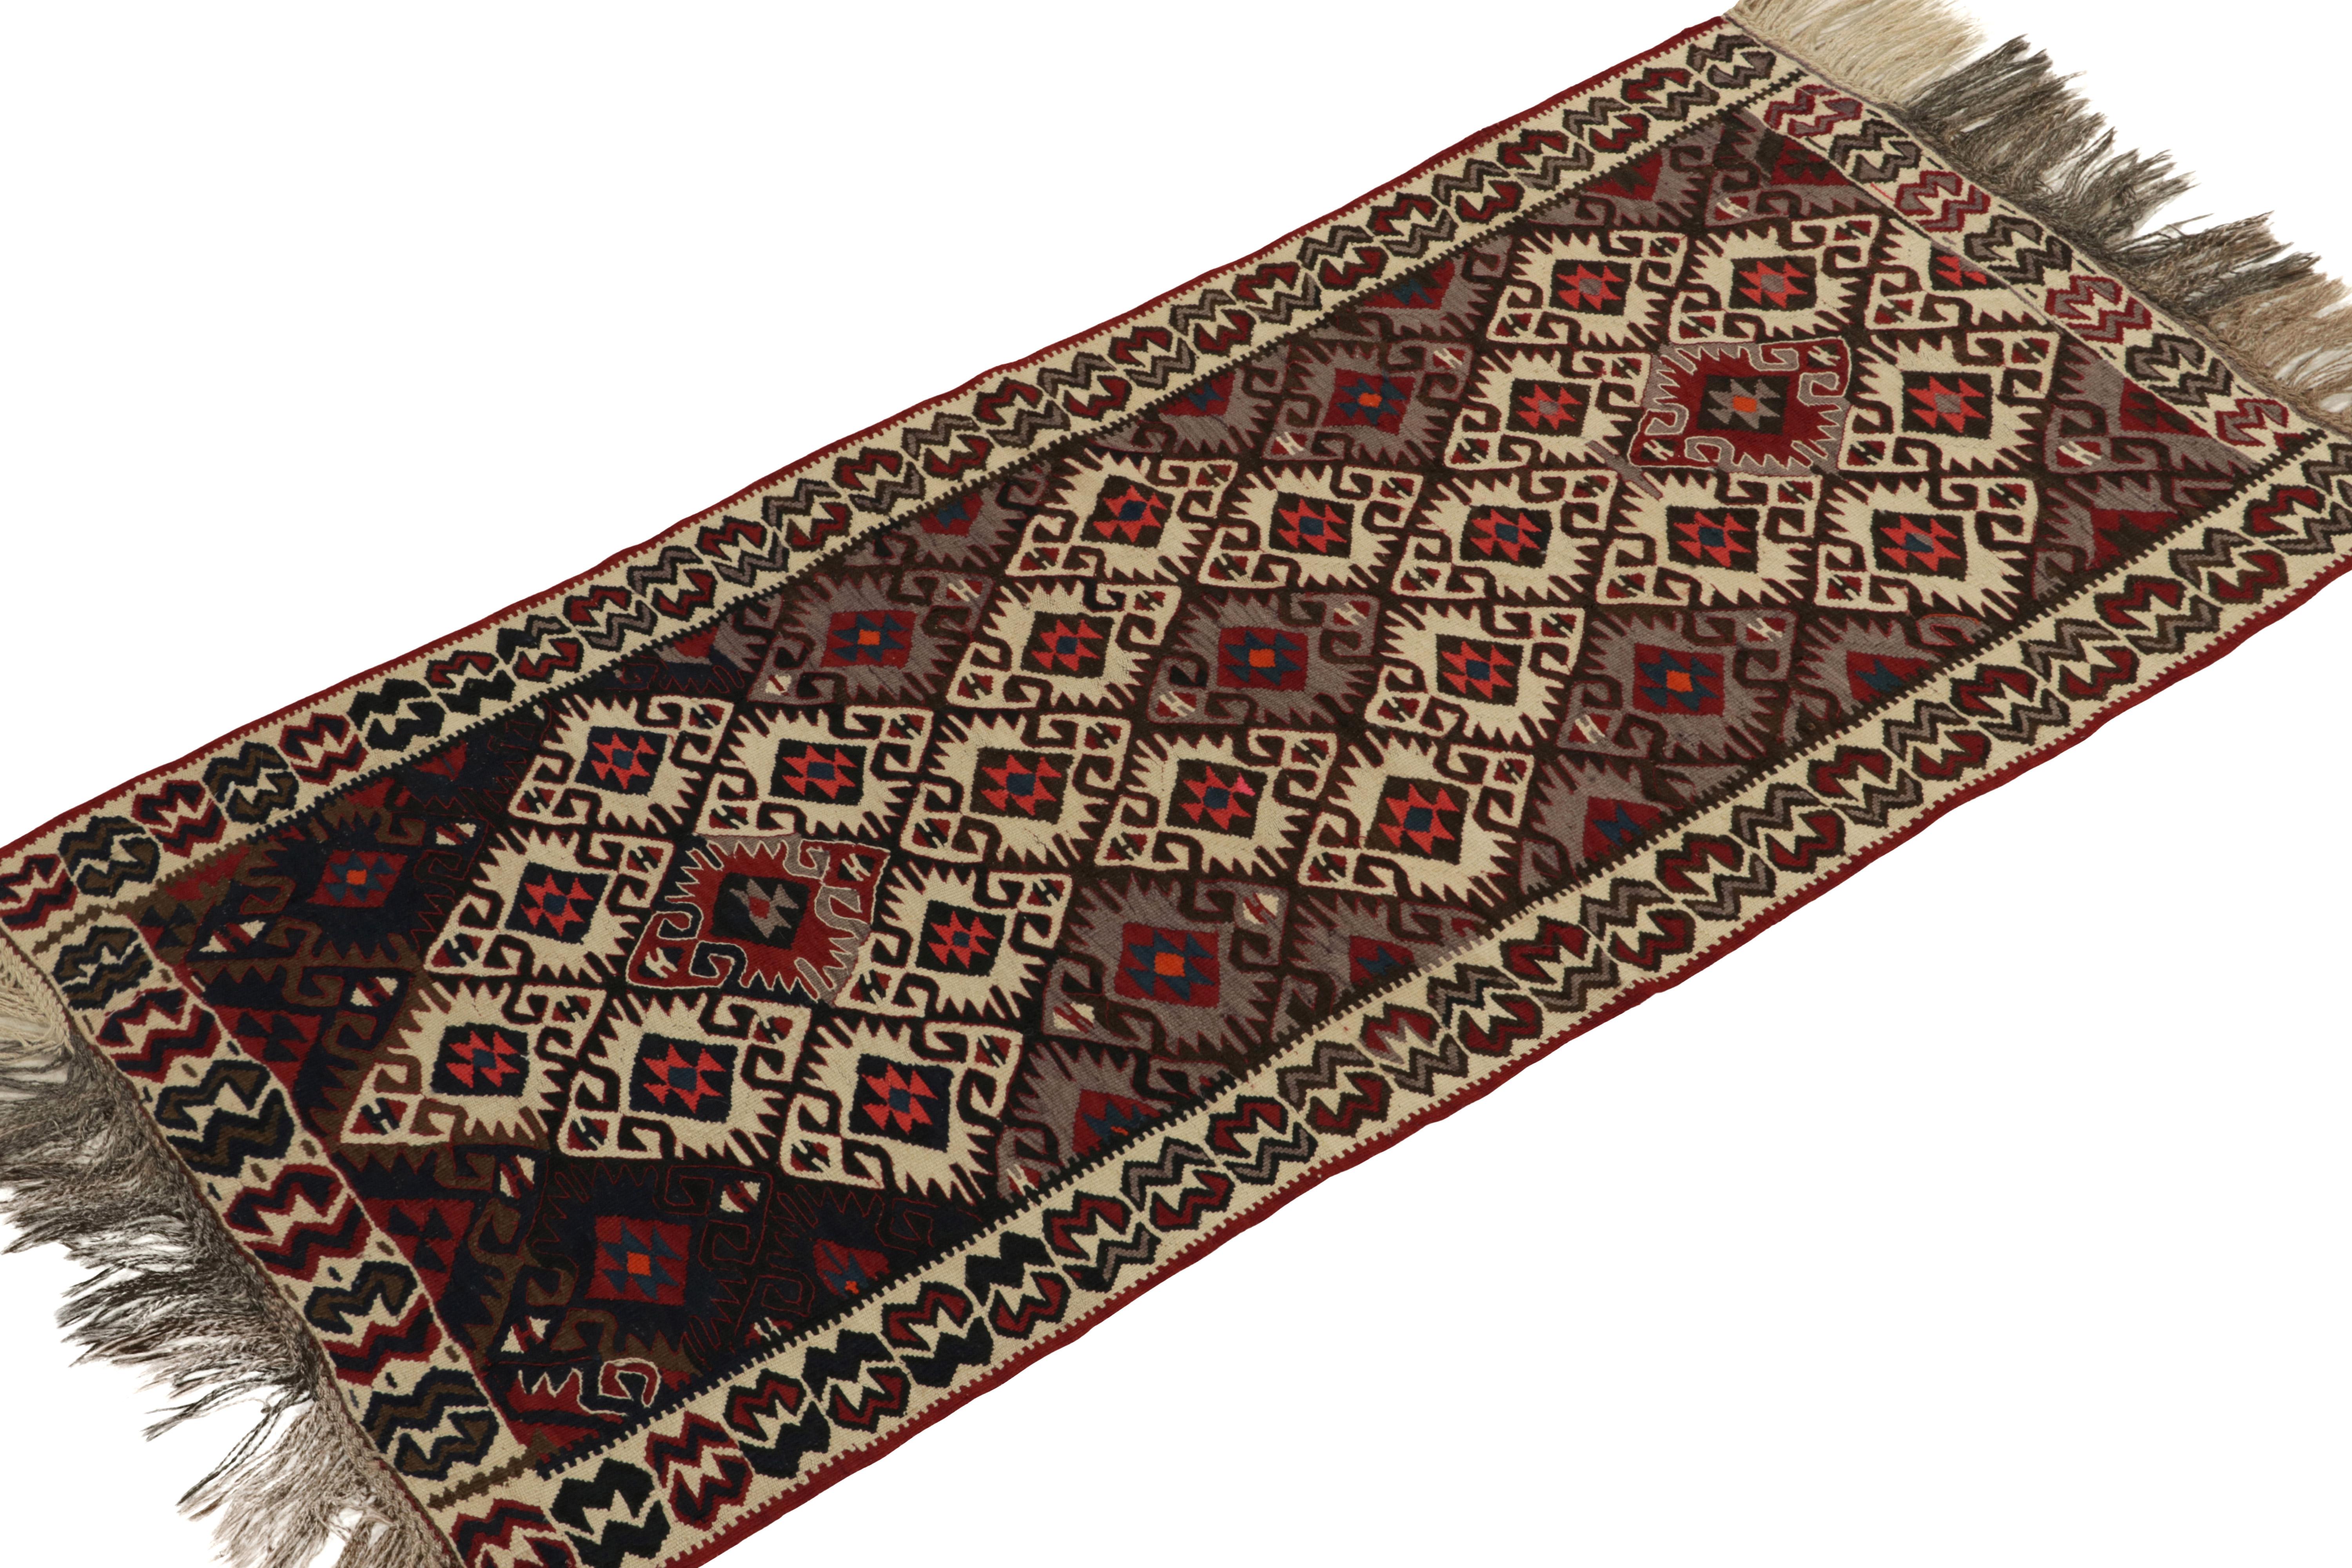 Handwoven in wool, this antique kilim runner connotes the richness of Turkish tribal aesthetics of the early 1900s. 

On the Design: The 3x6 masterpiece carries a dense tribal field design with traditional symbols like  beige elibelinde “hands on